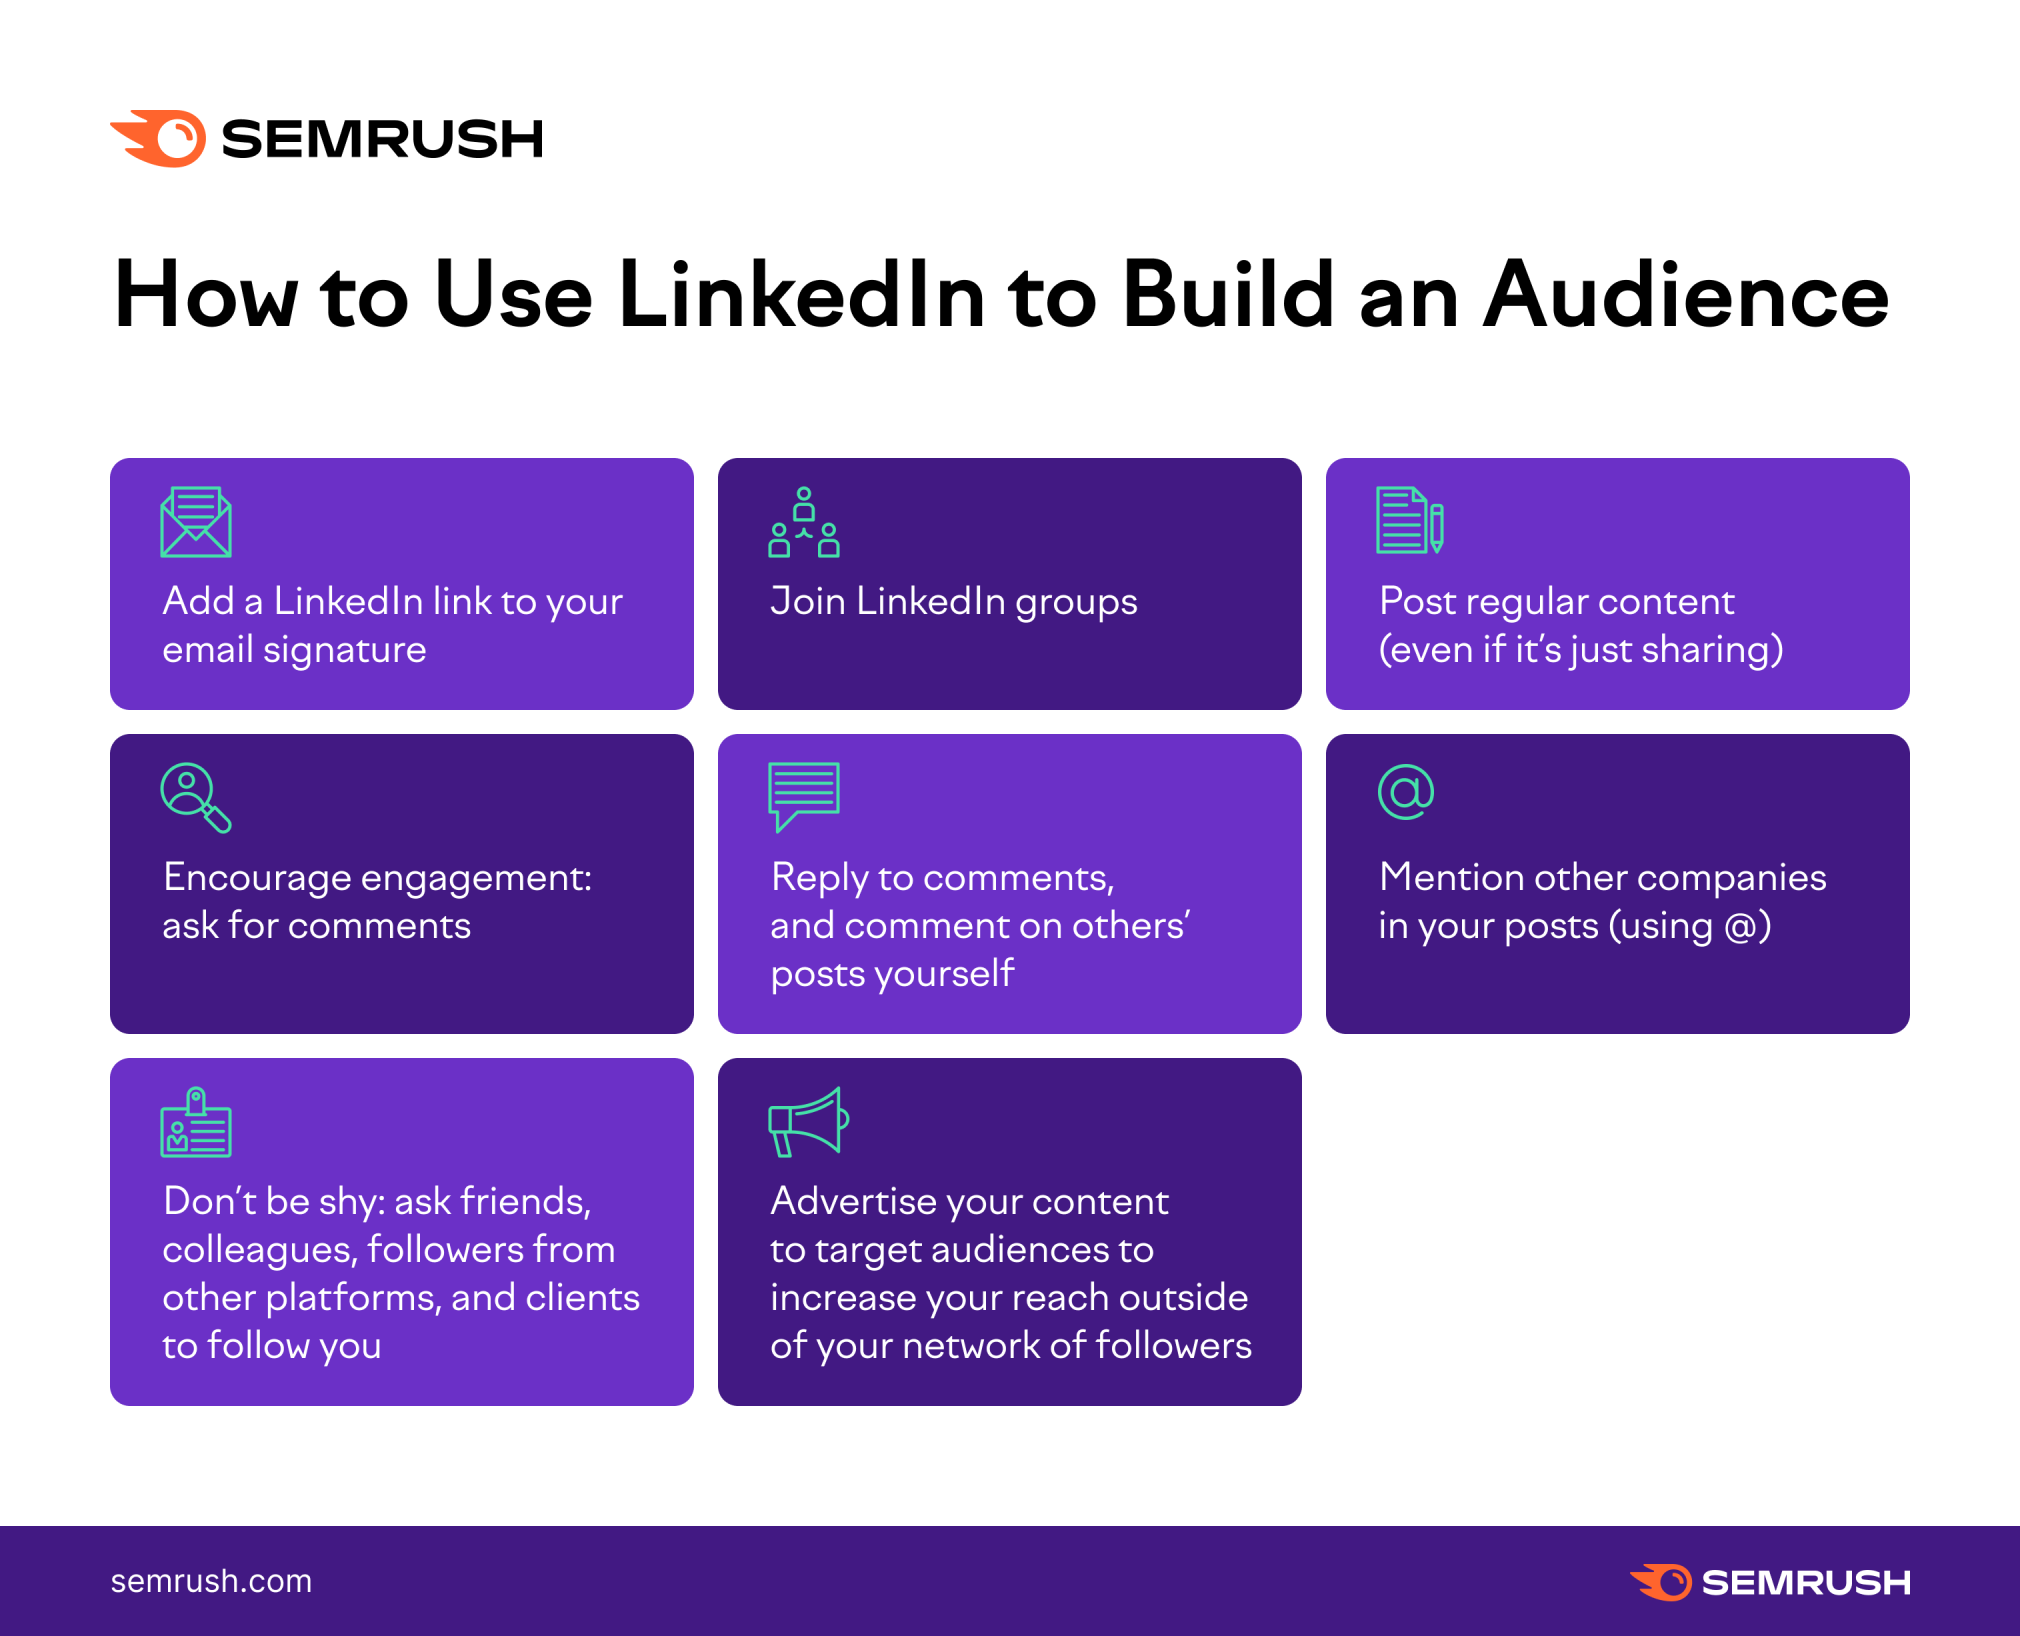 How Can I Use LinkedIn to Build an Audience?